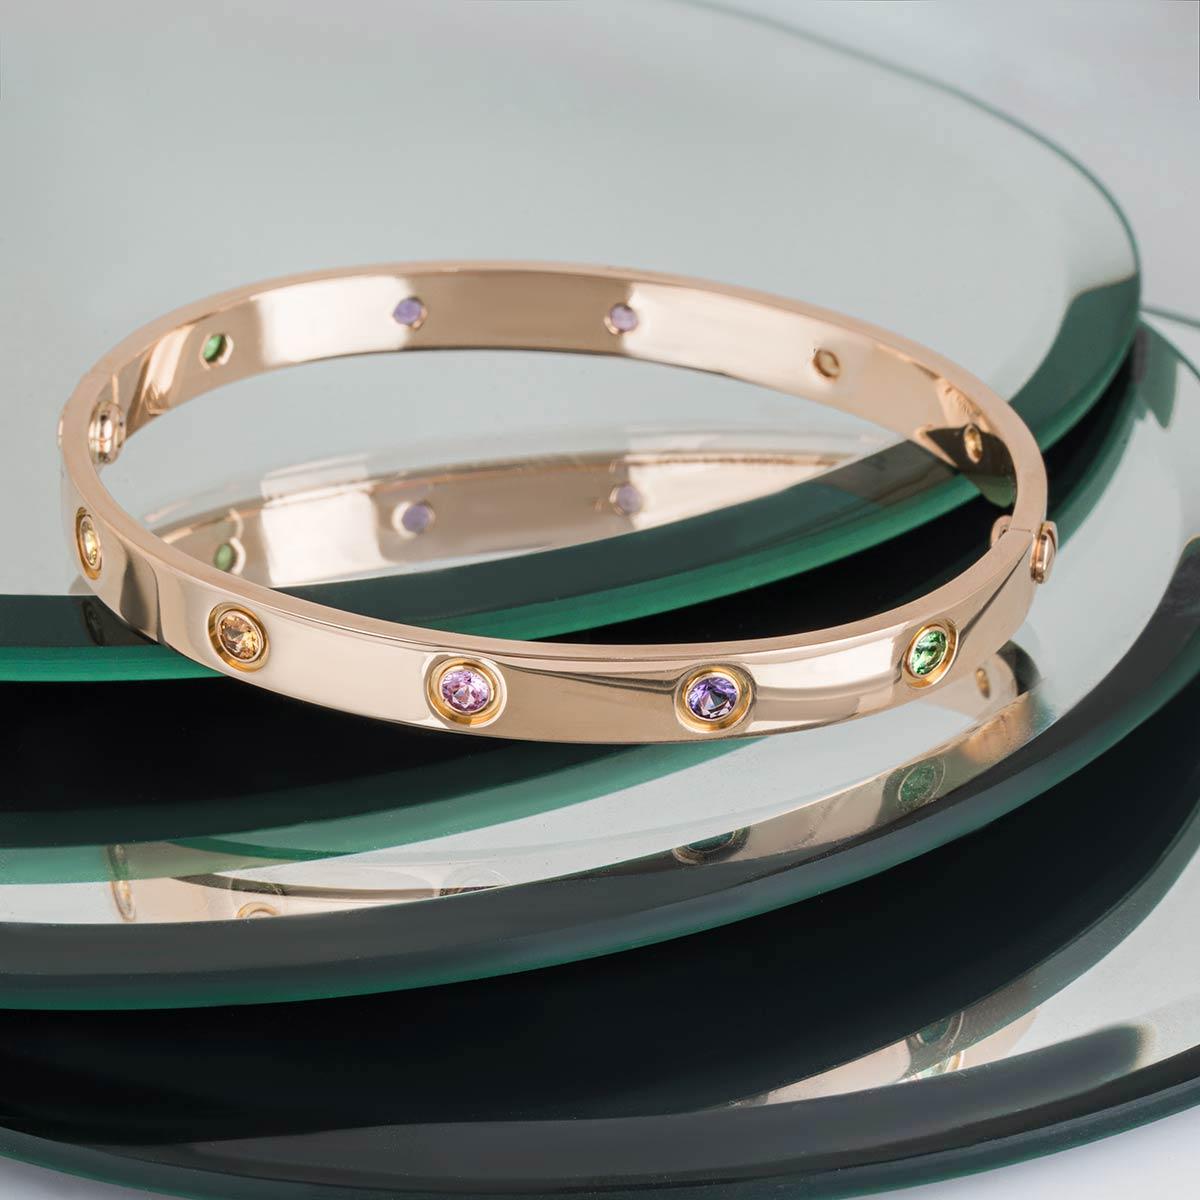 Cartier Rose Gold Coloured Stones Love Bracelet Size 16 B6036516 In Excellent Condition For Sale In London, GB